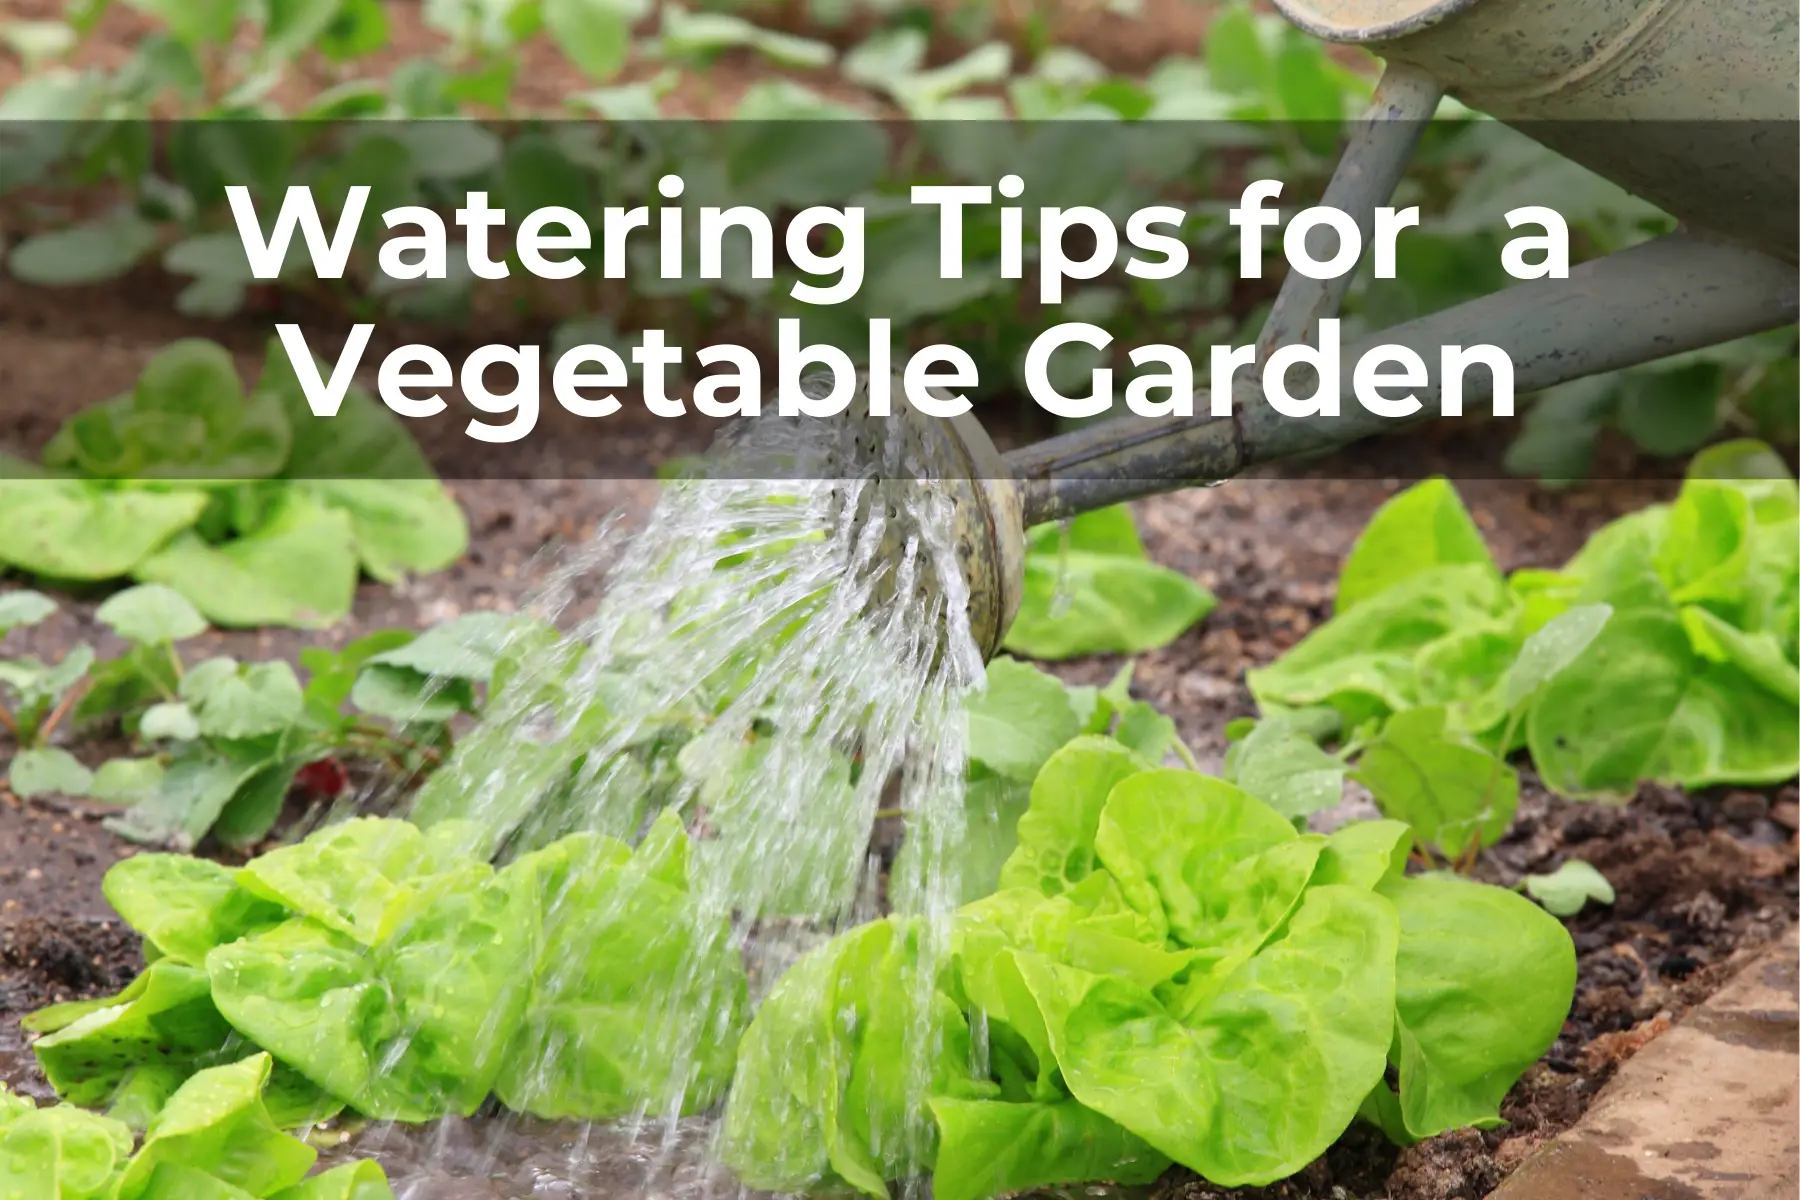 Tips for Watering Tips a Vegetable Garden